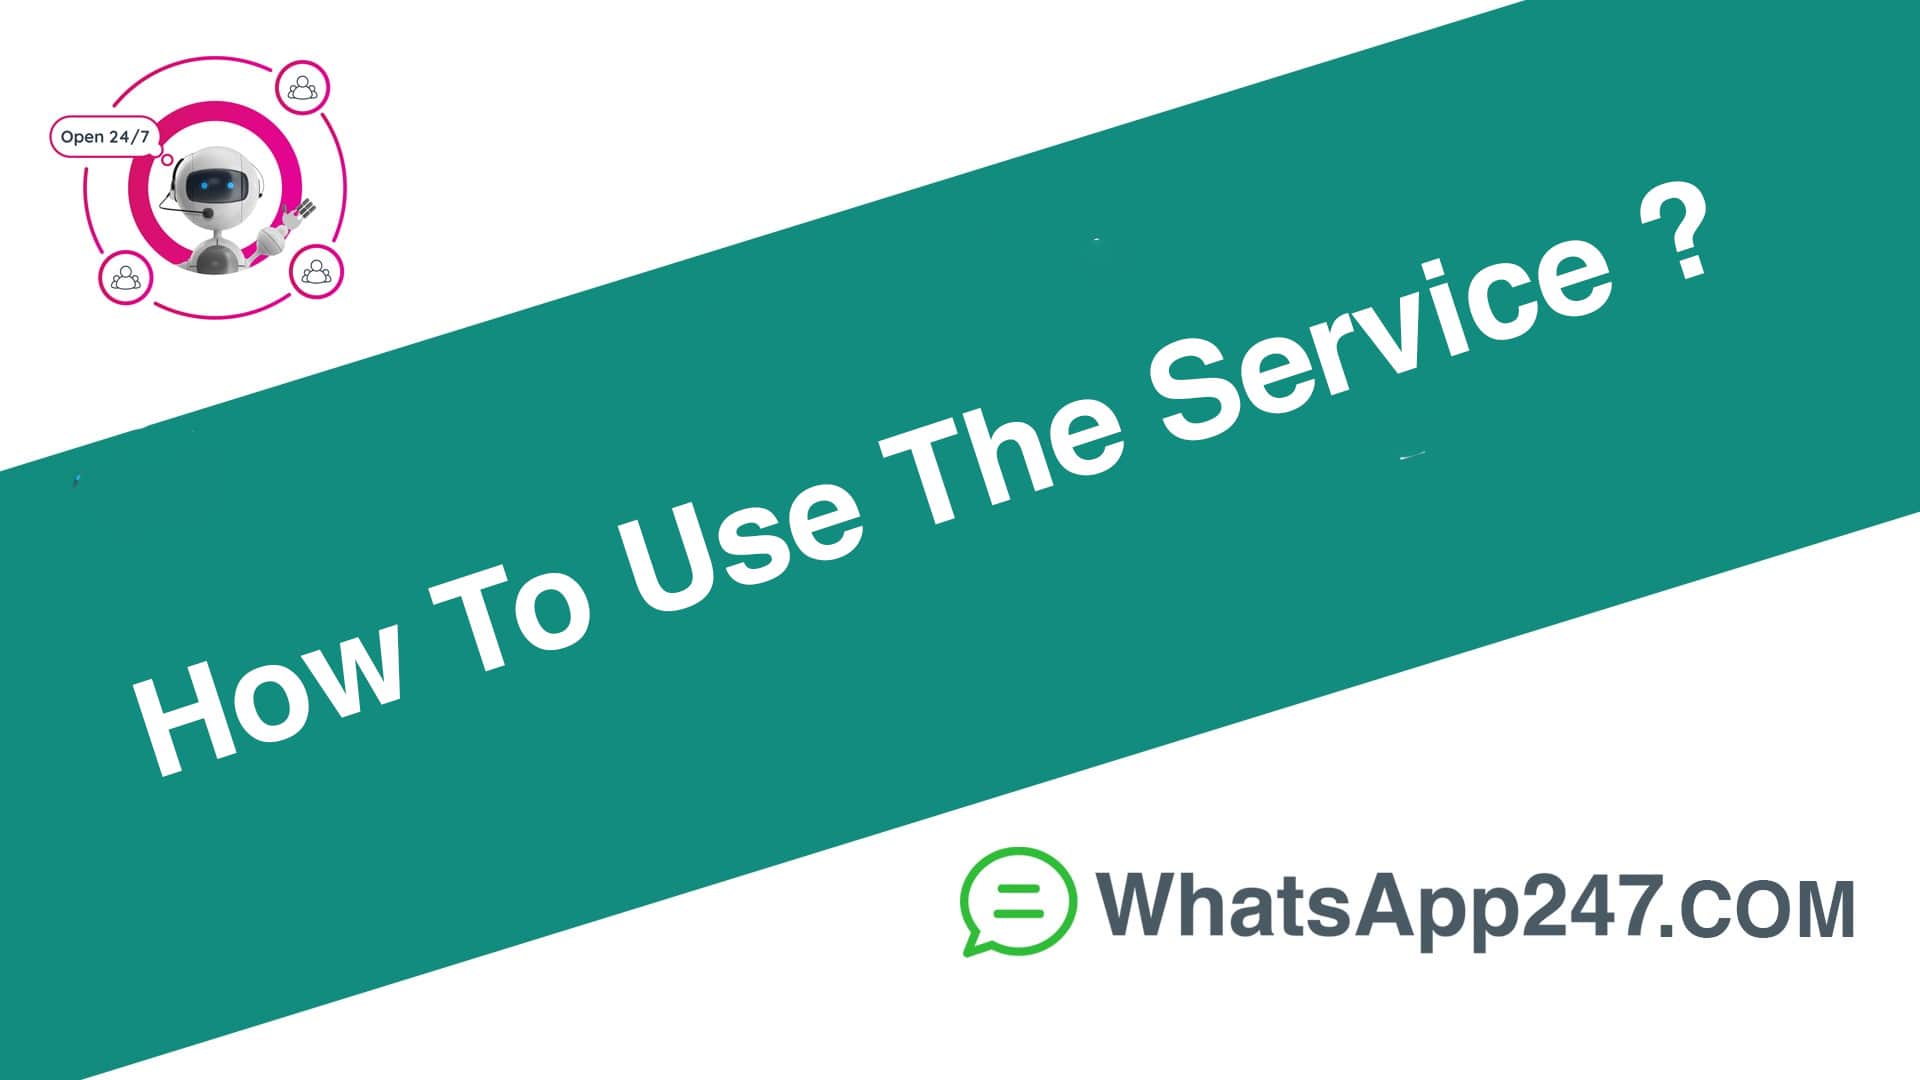 how to use the service